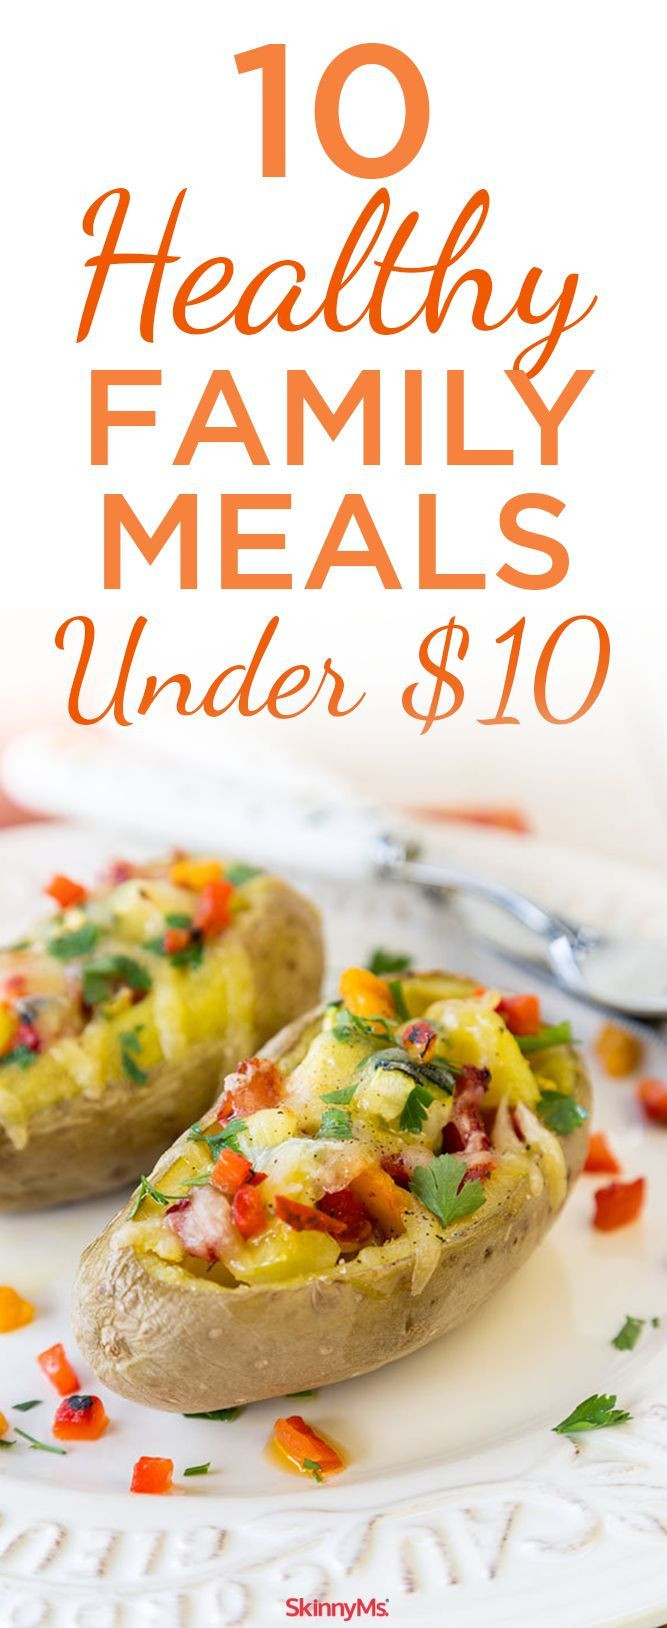 Cheap Healthy Dinner
 17 Best ideas about Bud Family Meals on Pinterest